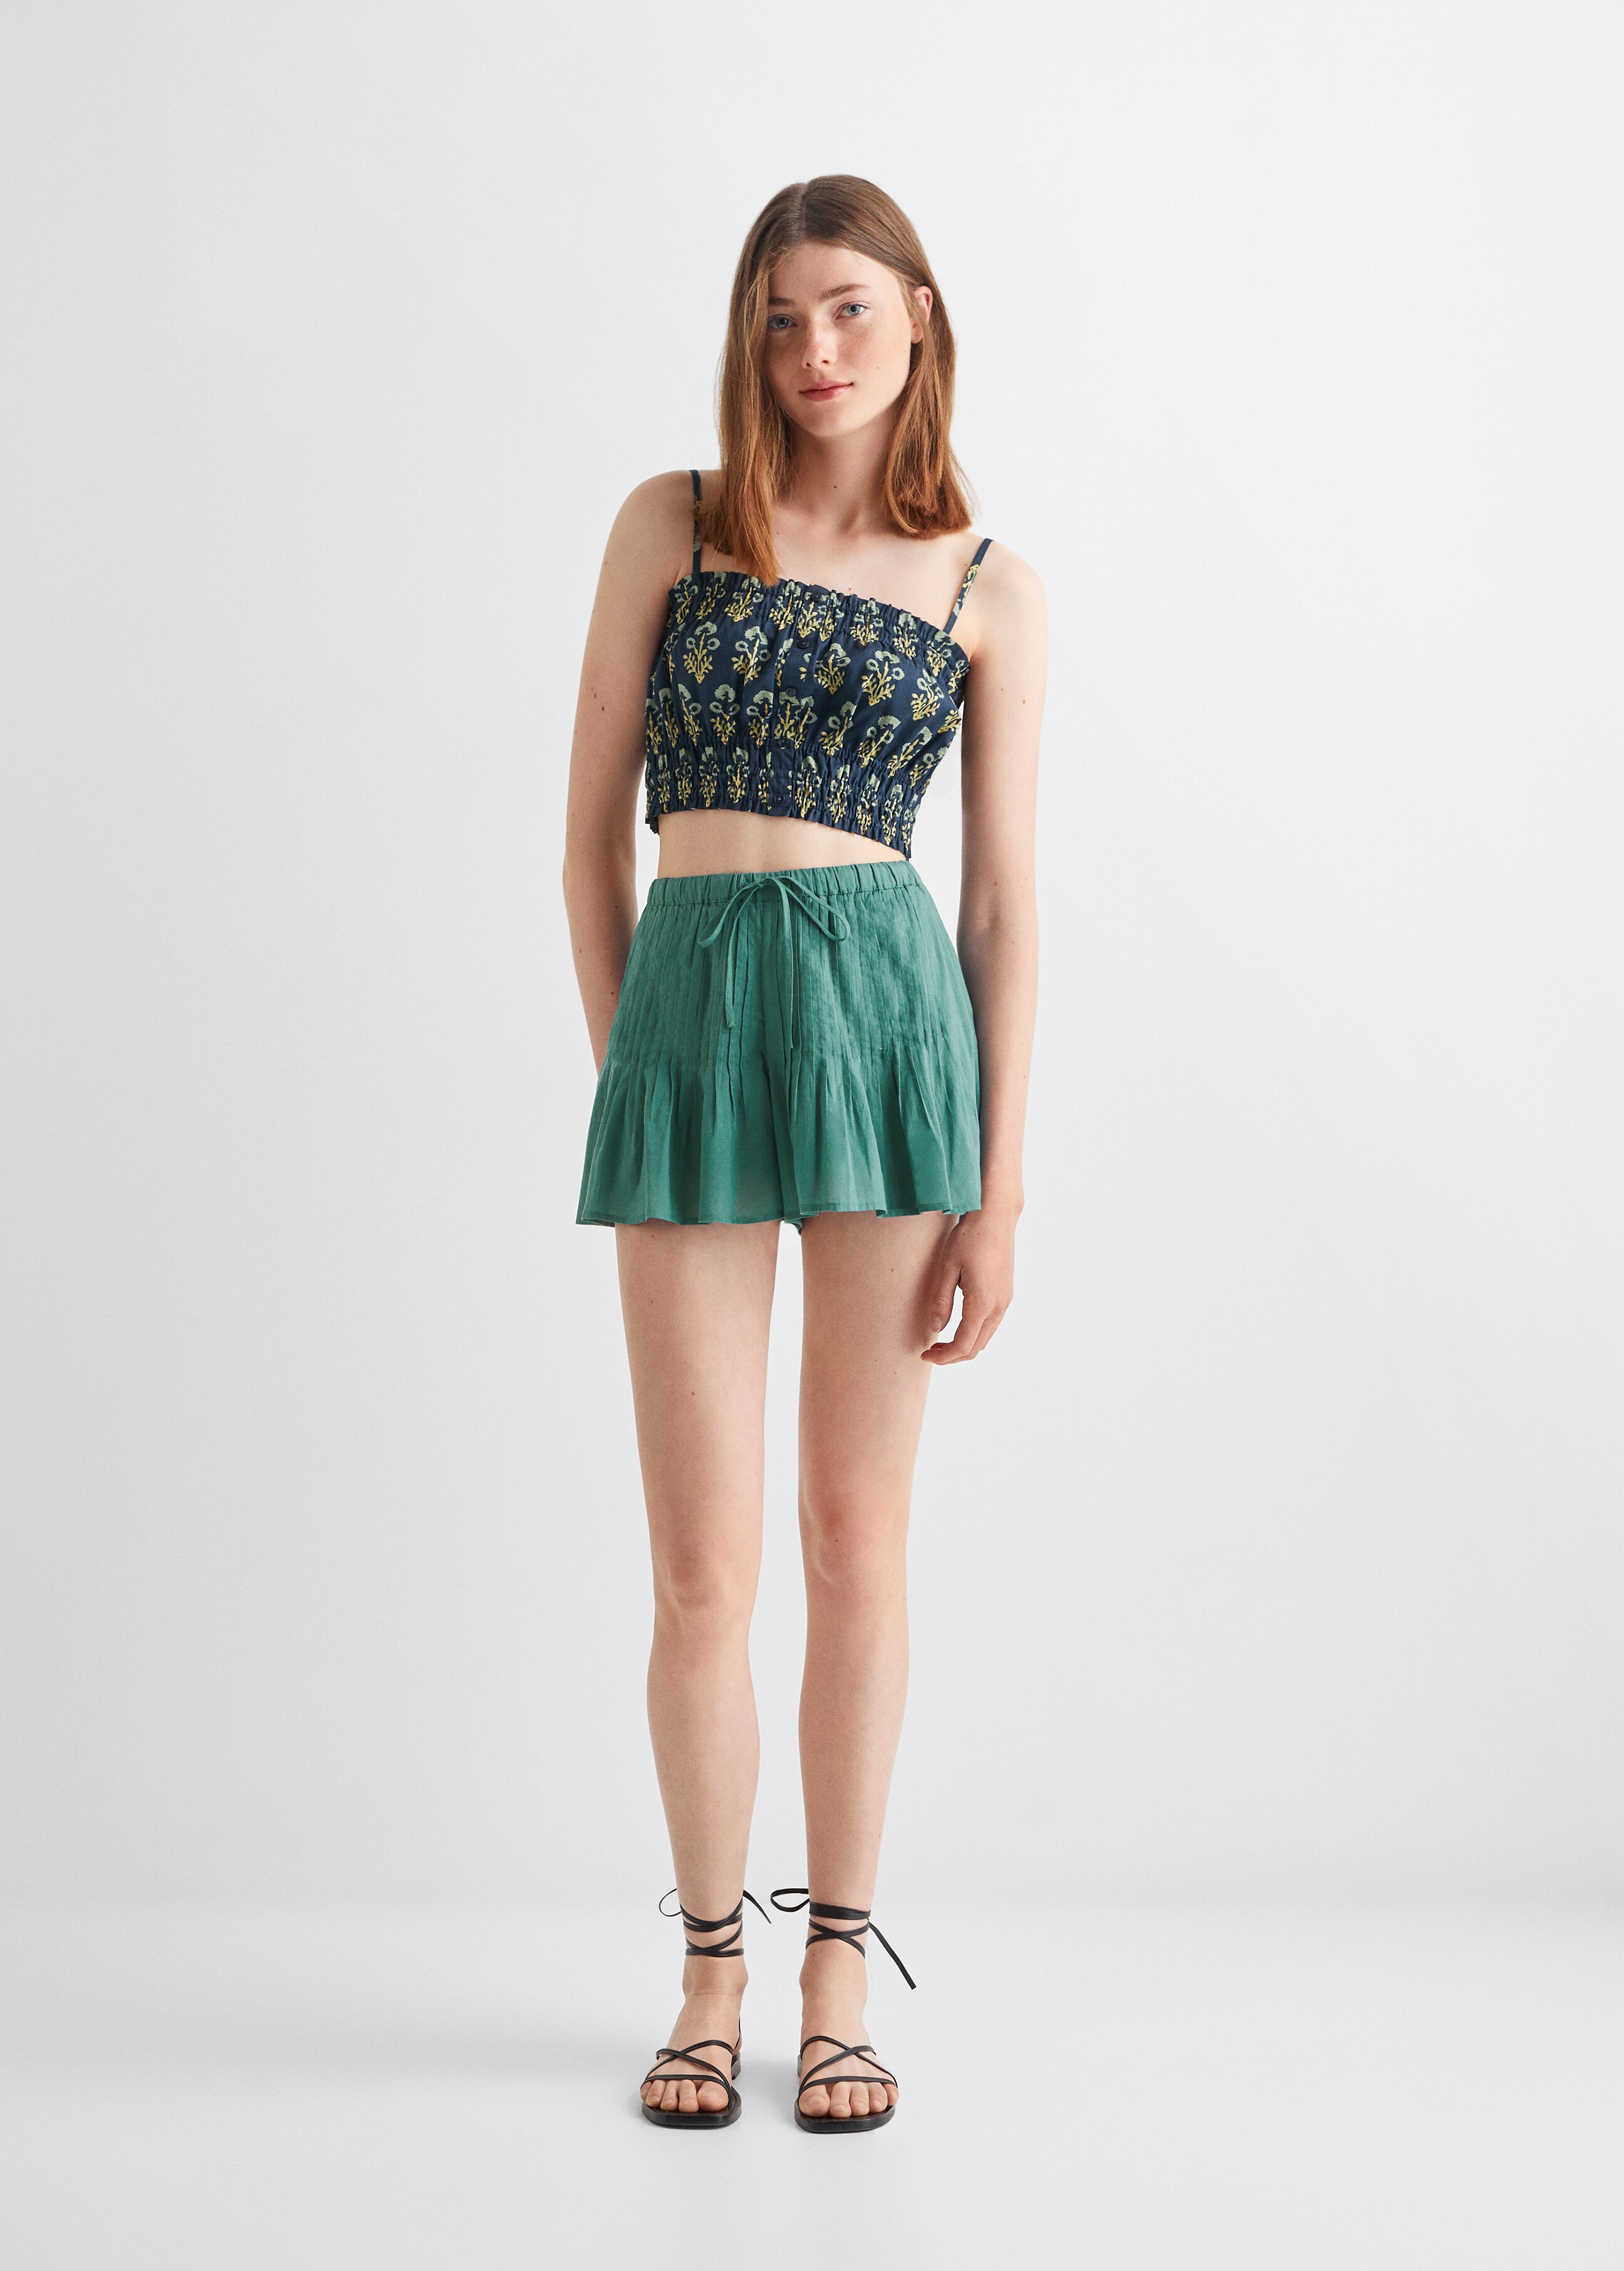 Pleated cotton shorts - General plane